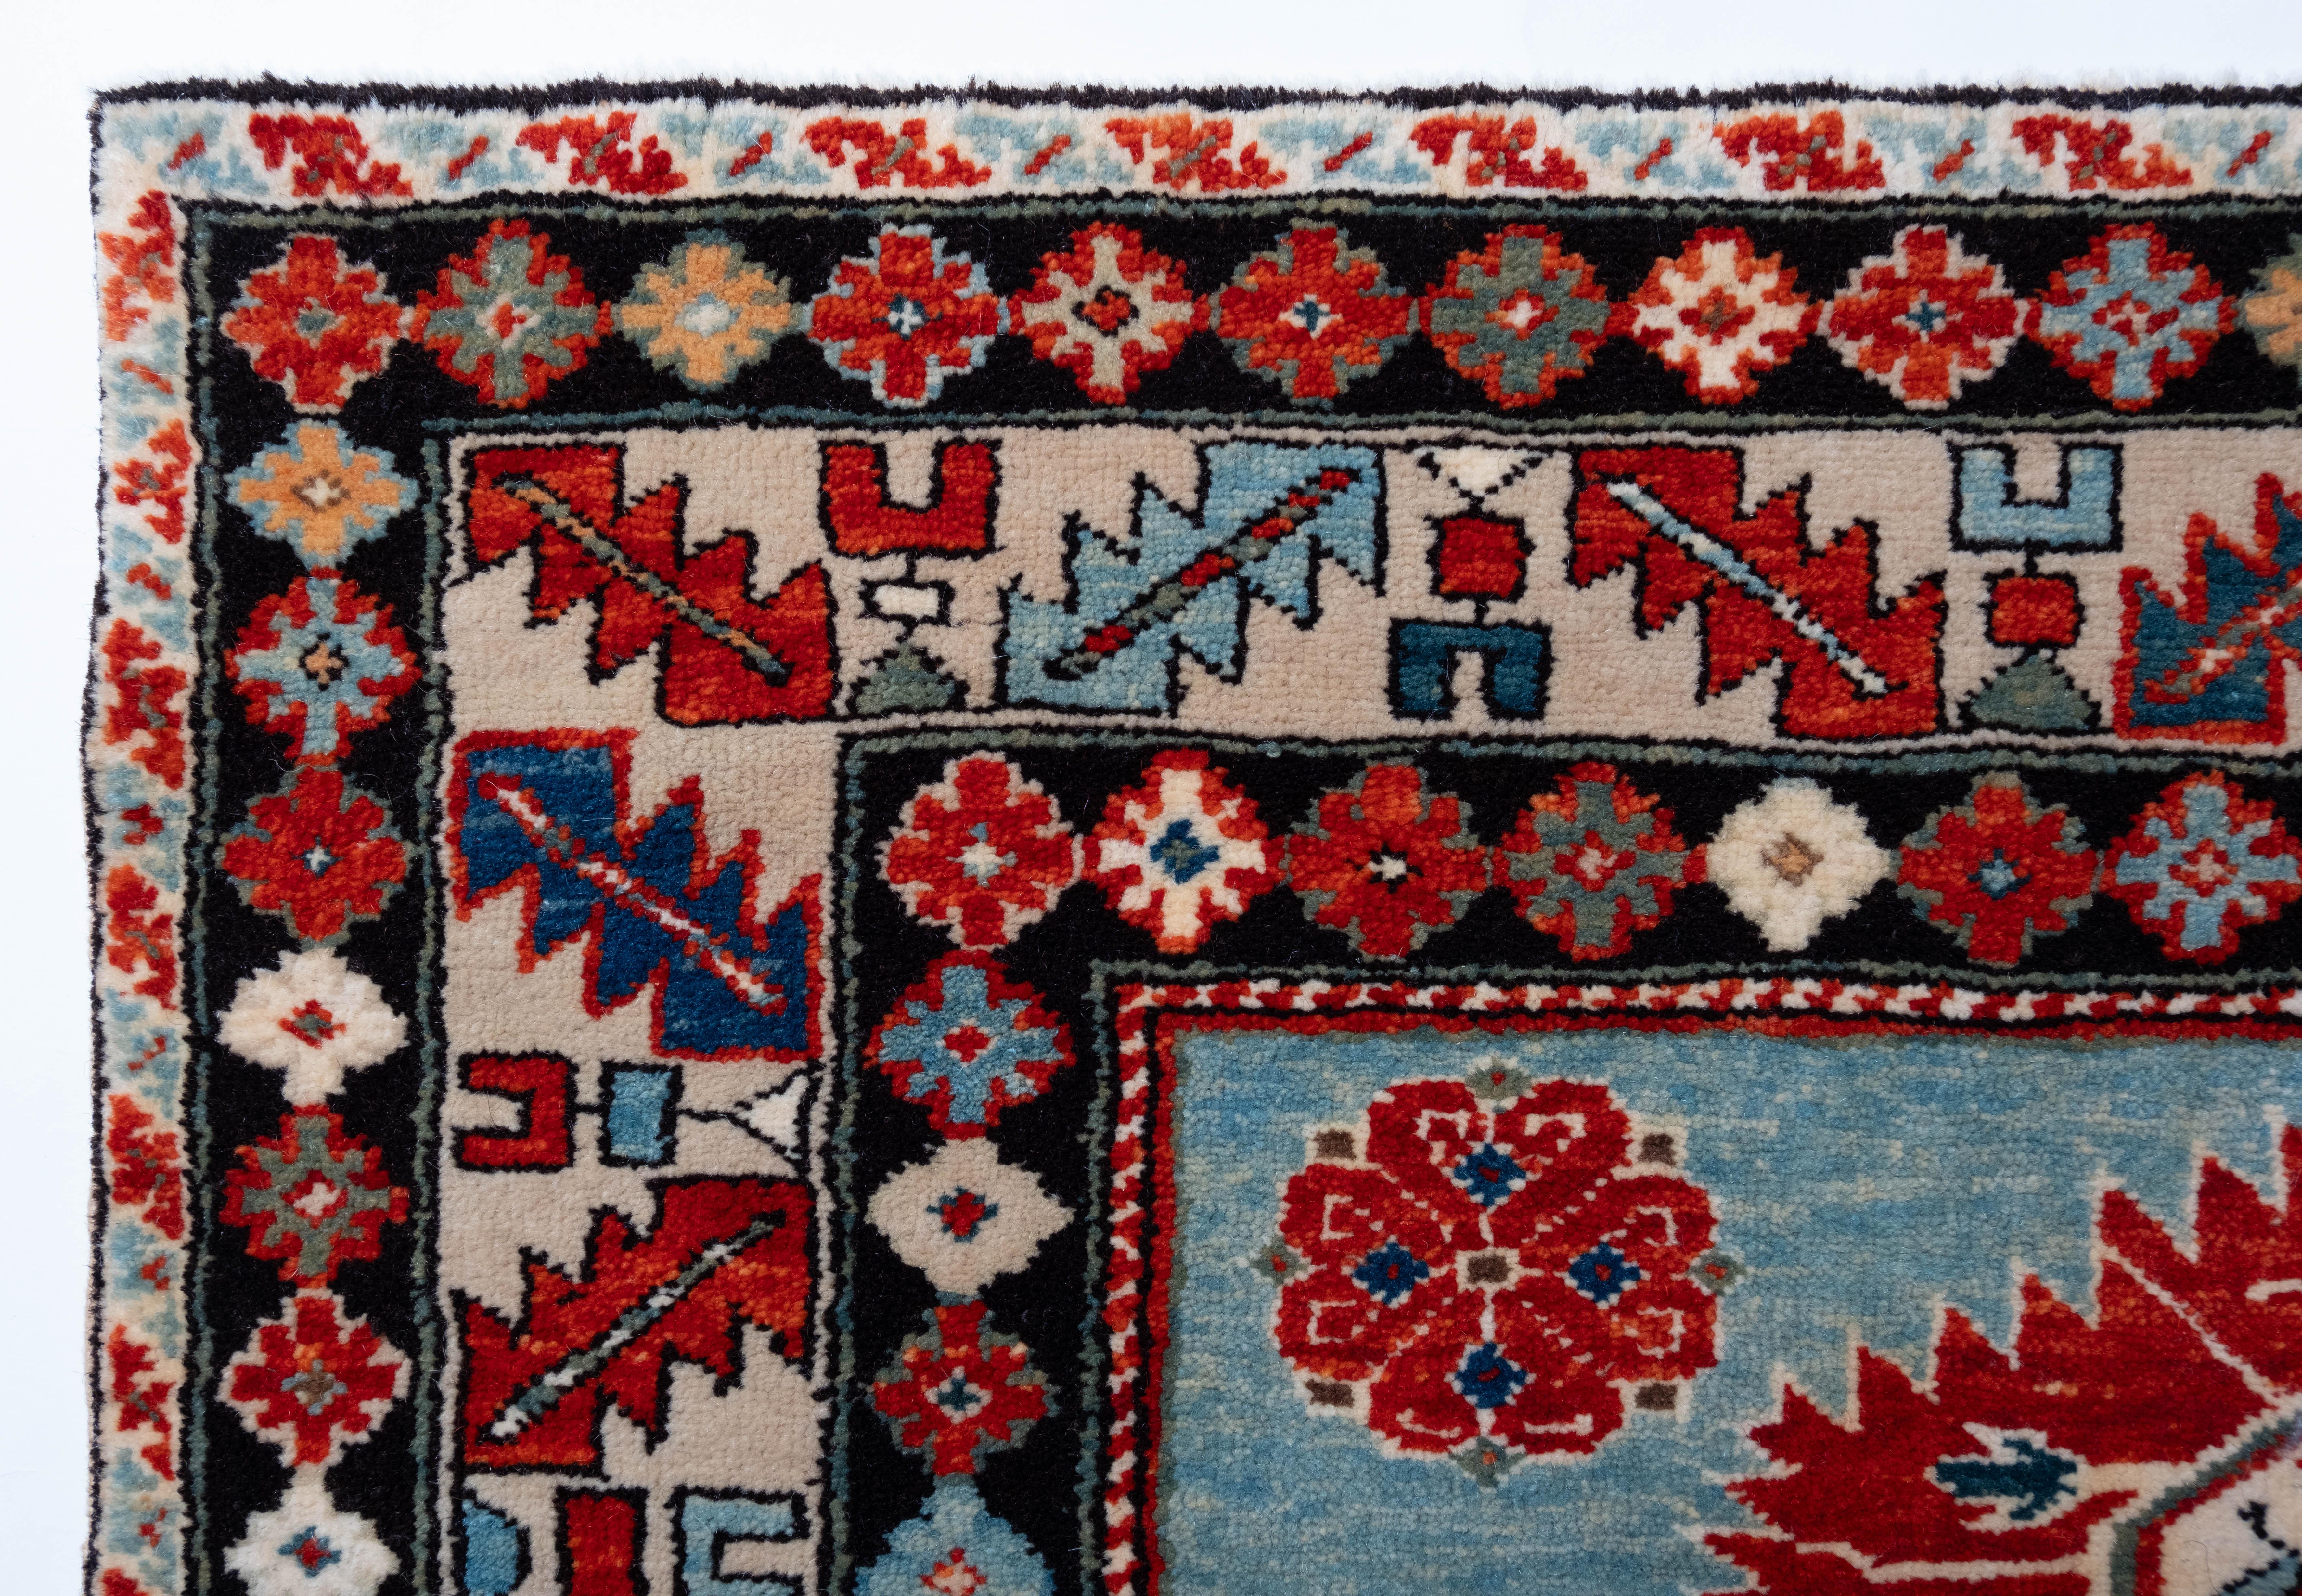 The source of the rug comes from the book Oriental Rugs Volume 1 Caucasian, Ian Bennett, Oriental Textile Press, Aberdeen 1993, pg.247. This is a Harshang design rug with palmettes from the early 19th century, Kuba region, Caucasus area. This is a